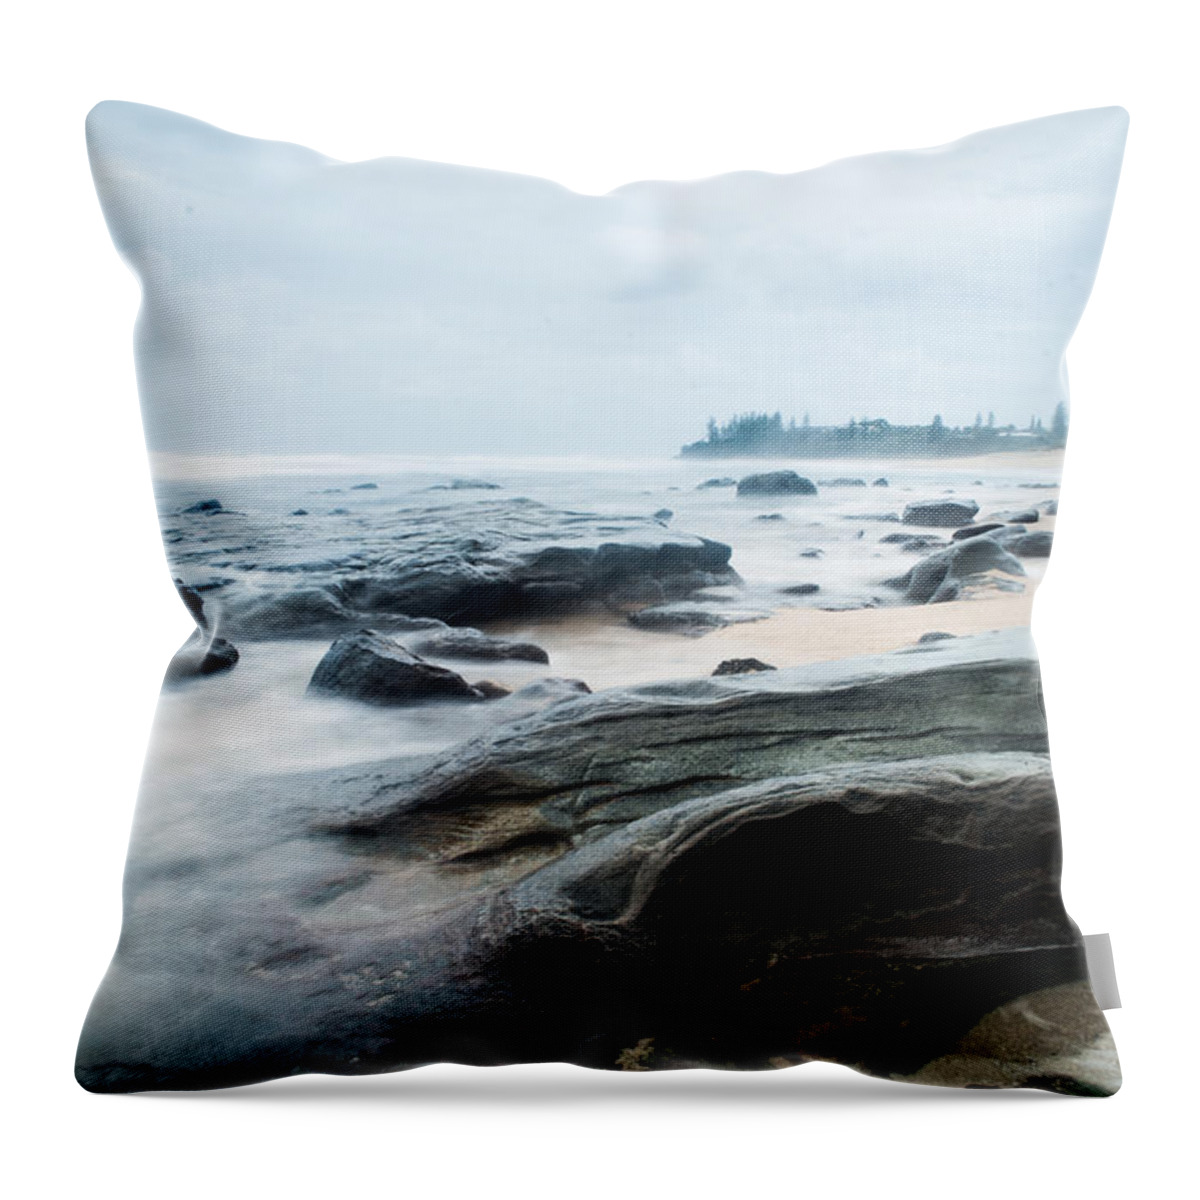 Ocean Throw Pillow featuring the photograph To Guard the Shore by Parker Cunningham